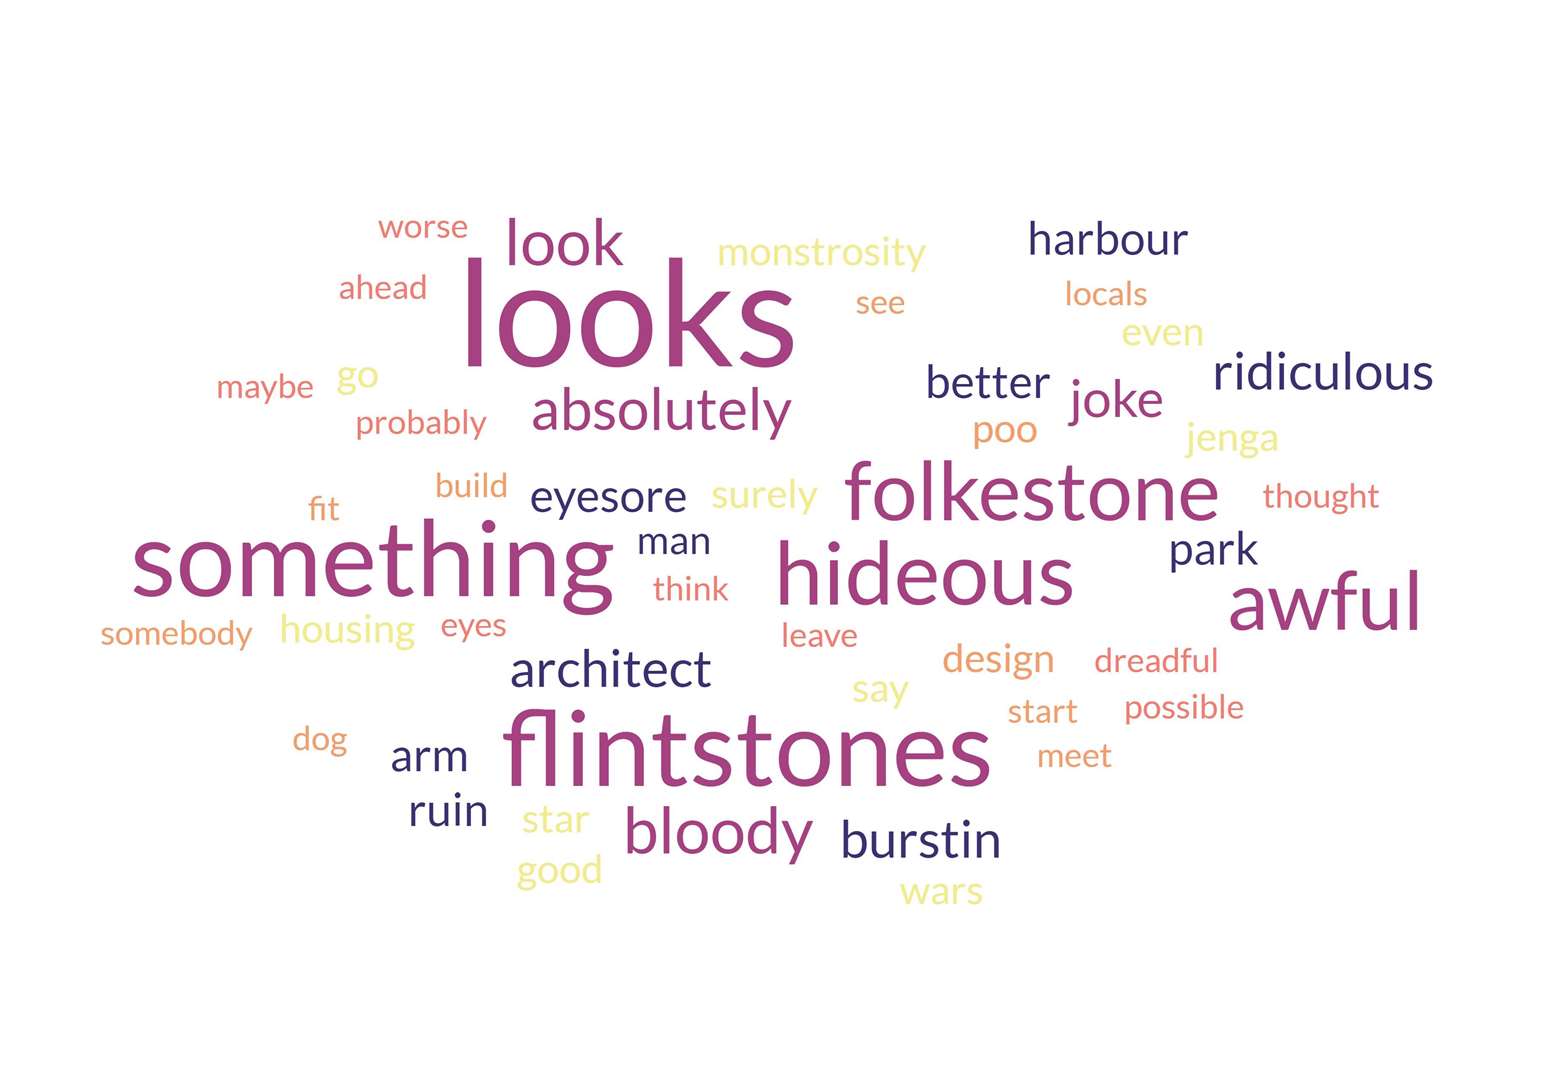 A word cloud formed from more than 100 comments made on KentOnline's Facebook page about the Folkestone harbour designs